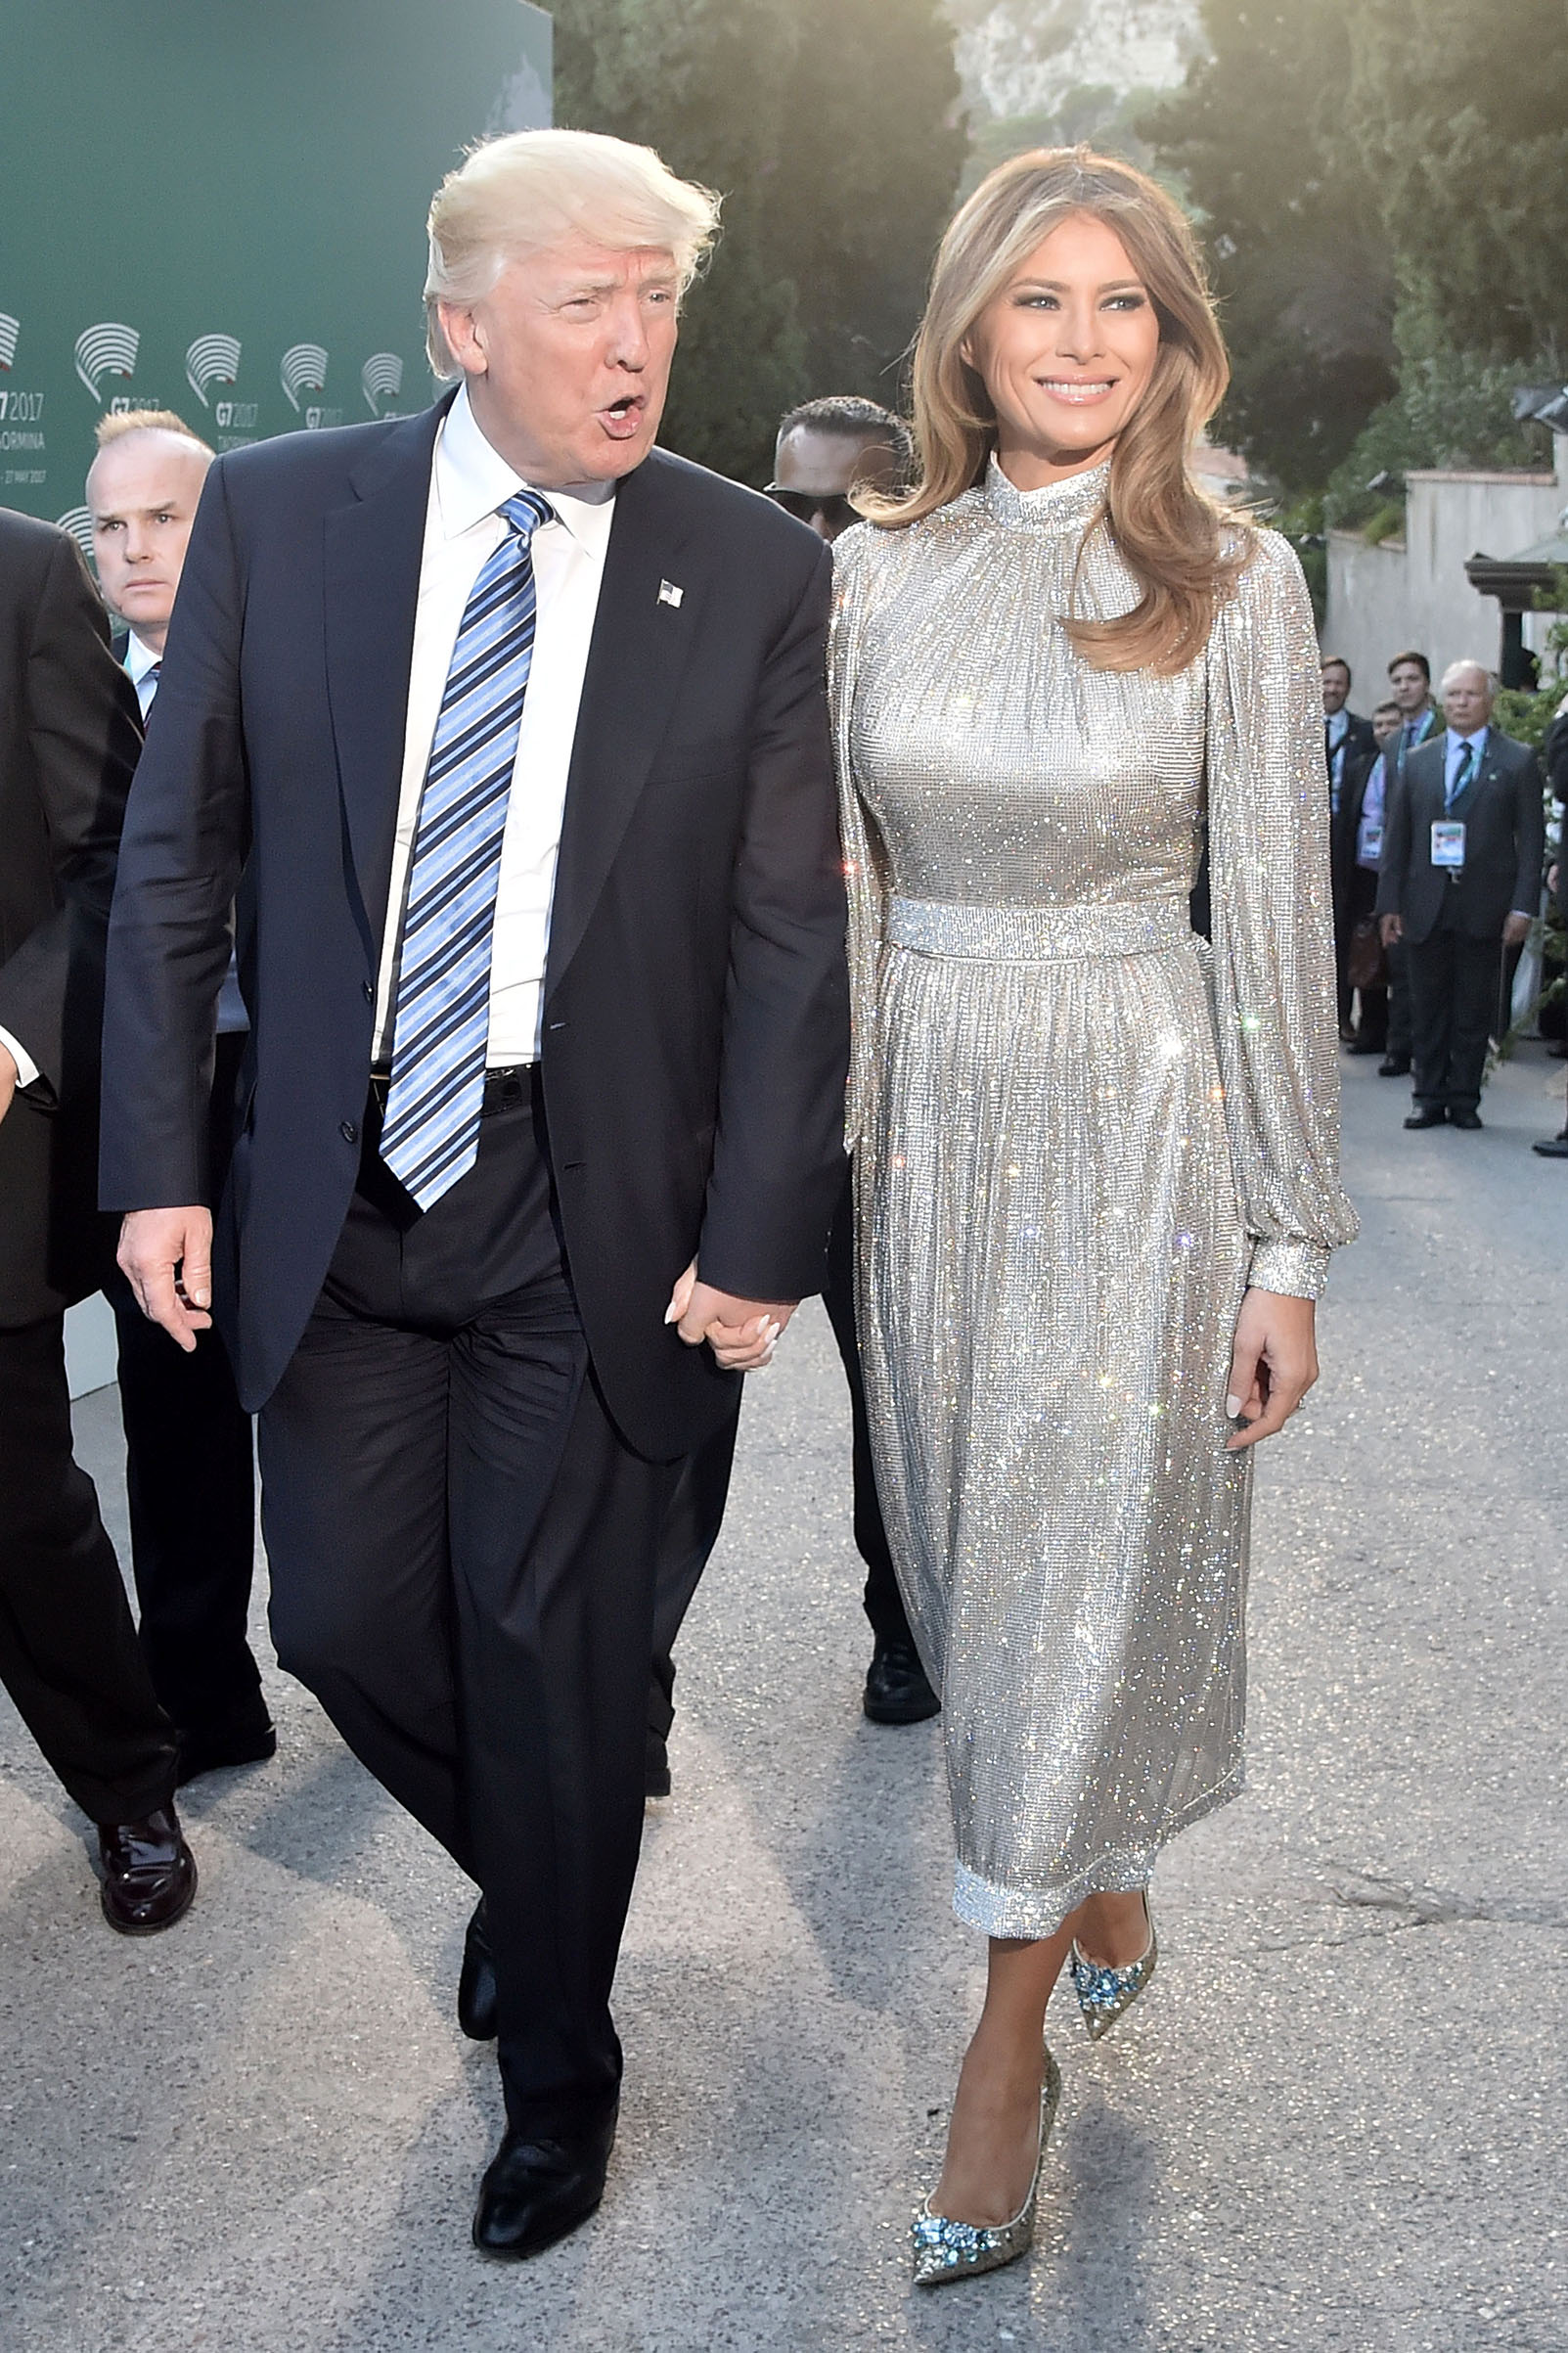 President Donald Trump and first lady Melania Trump wearing wearing Dolce & Gabbana's glittering dress, hold hands as they arrive for a concert of La Scala Philharmonic Orchestra at the ancient Greek Theatre of Taormina during the Heads of State and of Government G7 summit, on May 26, 2017 in Sicily, Italy.